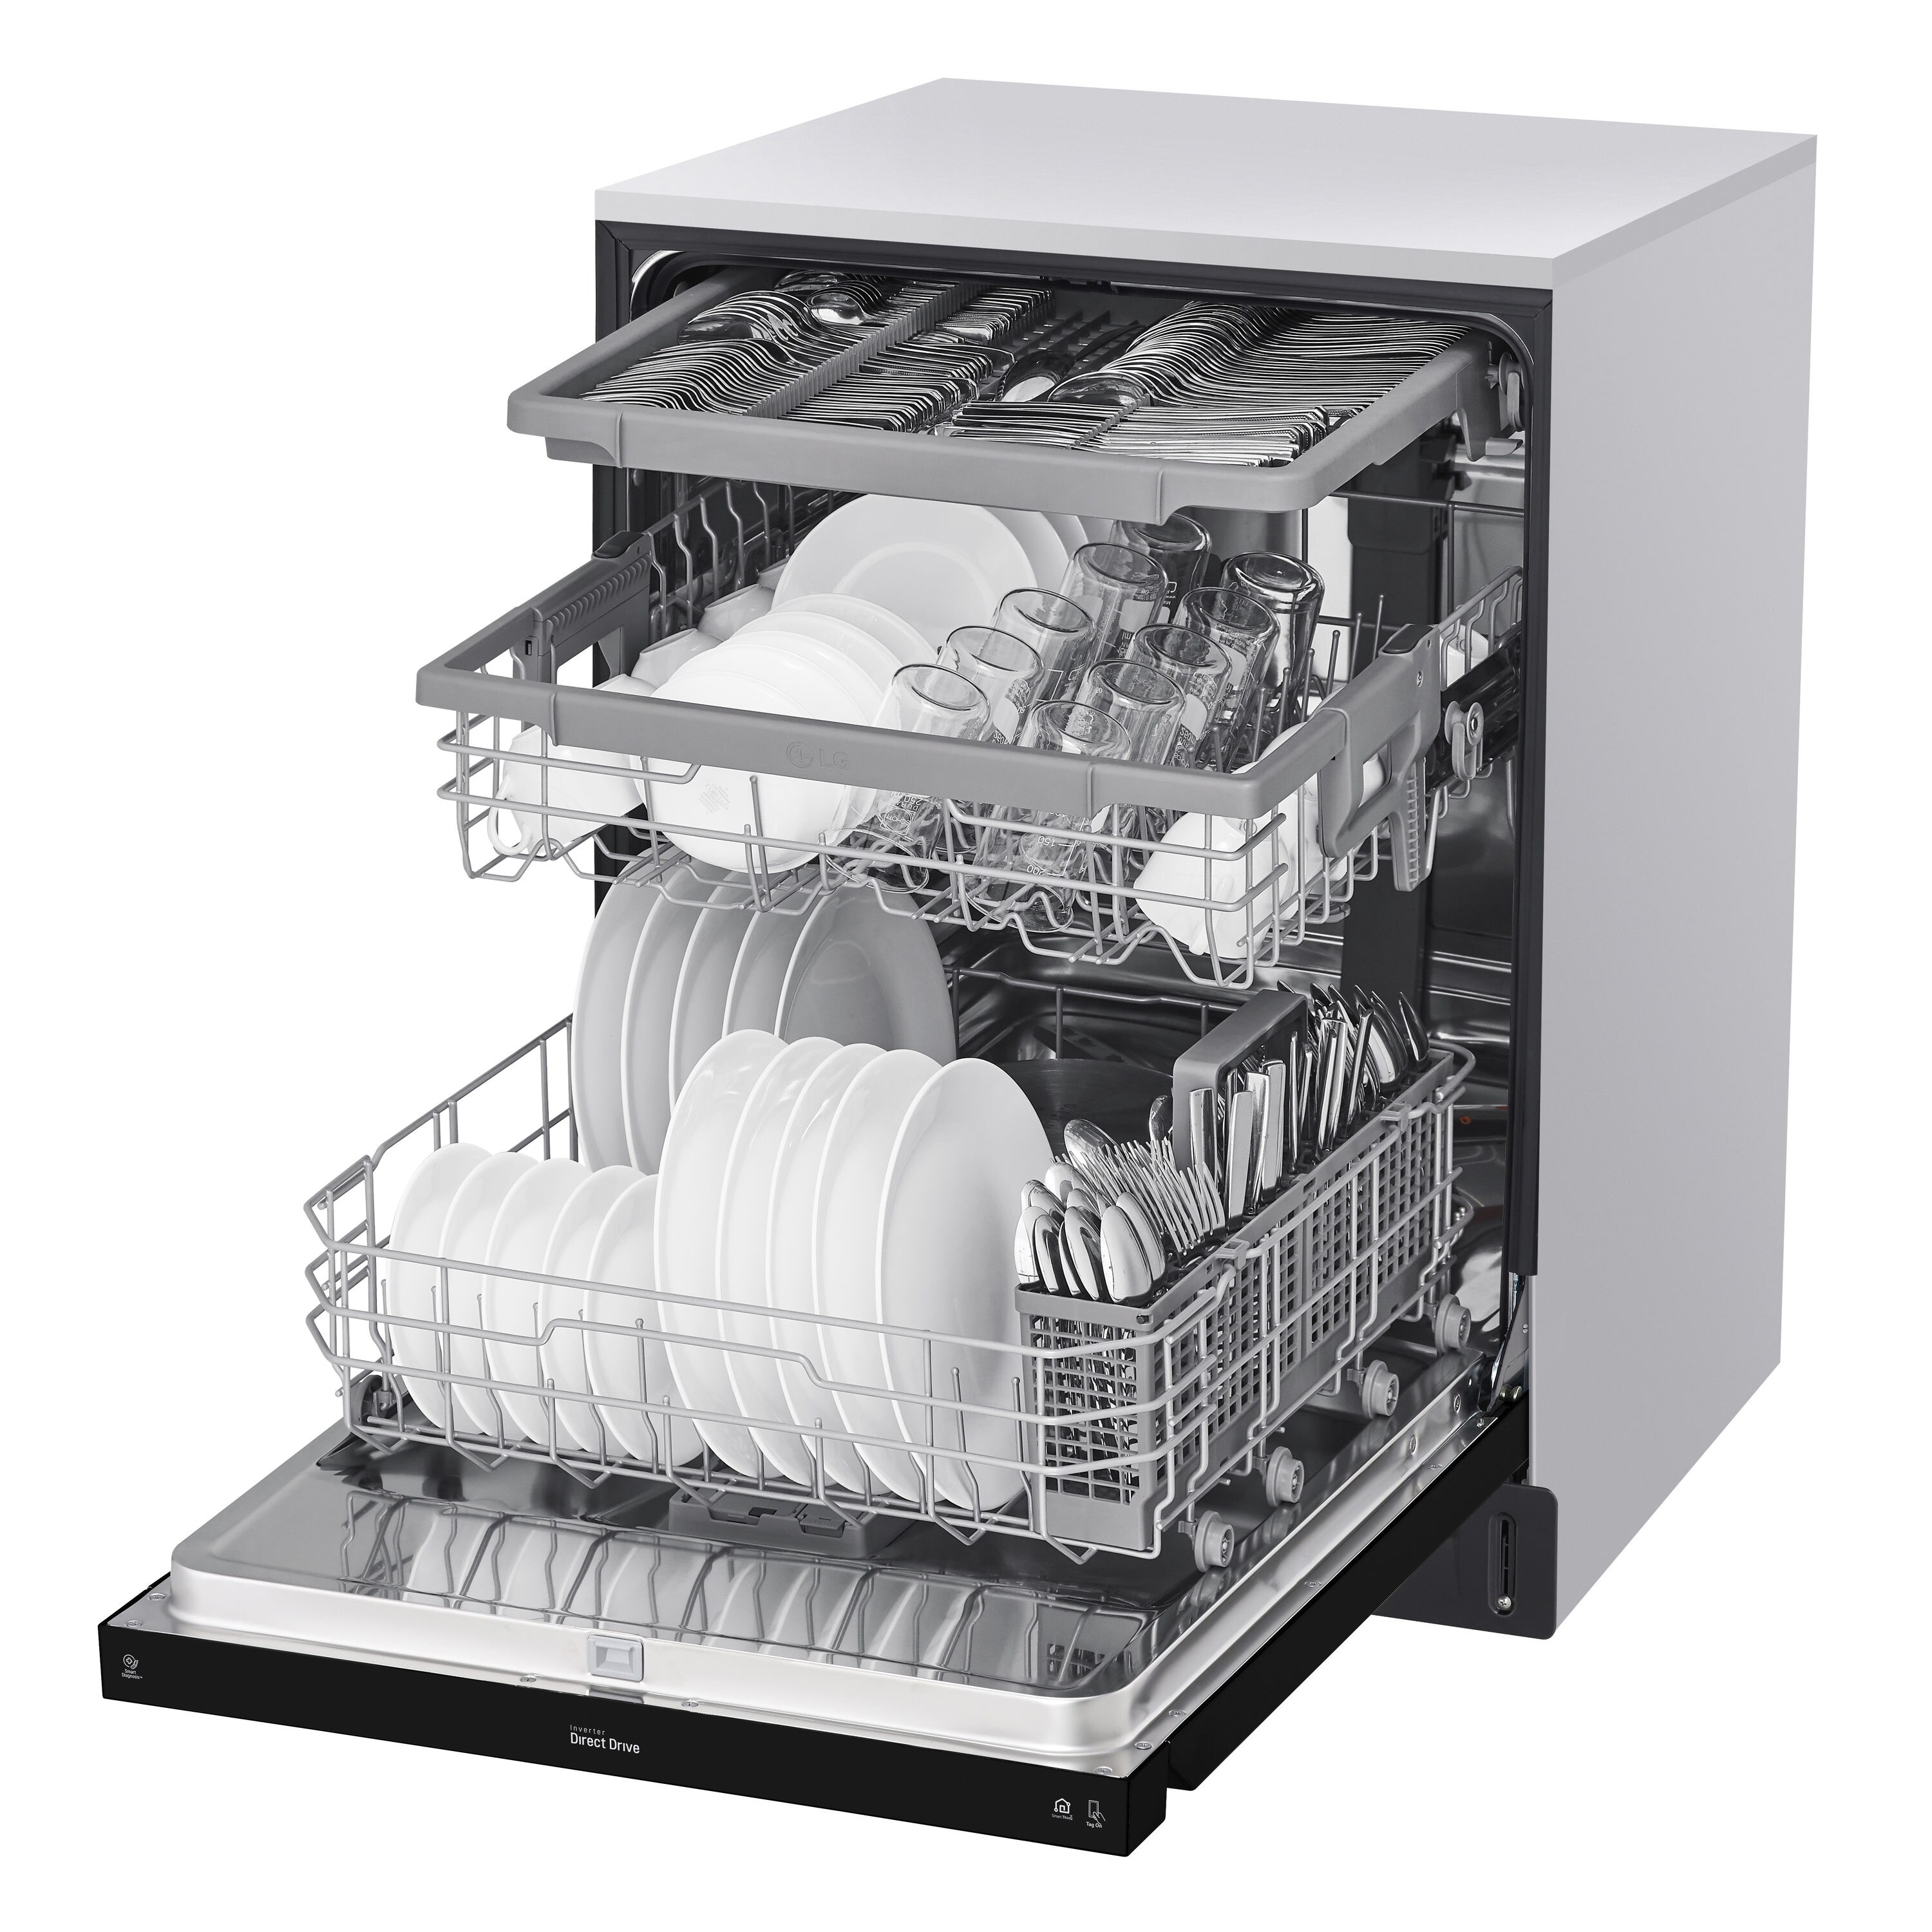 LG 24 Built-In Bar Handle Dishwasher with 3rd Rack in Print Proof Black  Stainless Steel